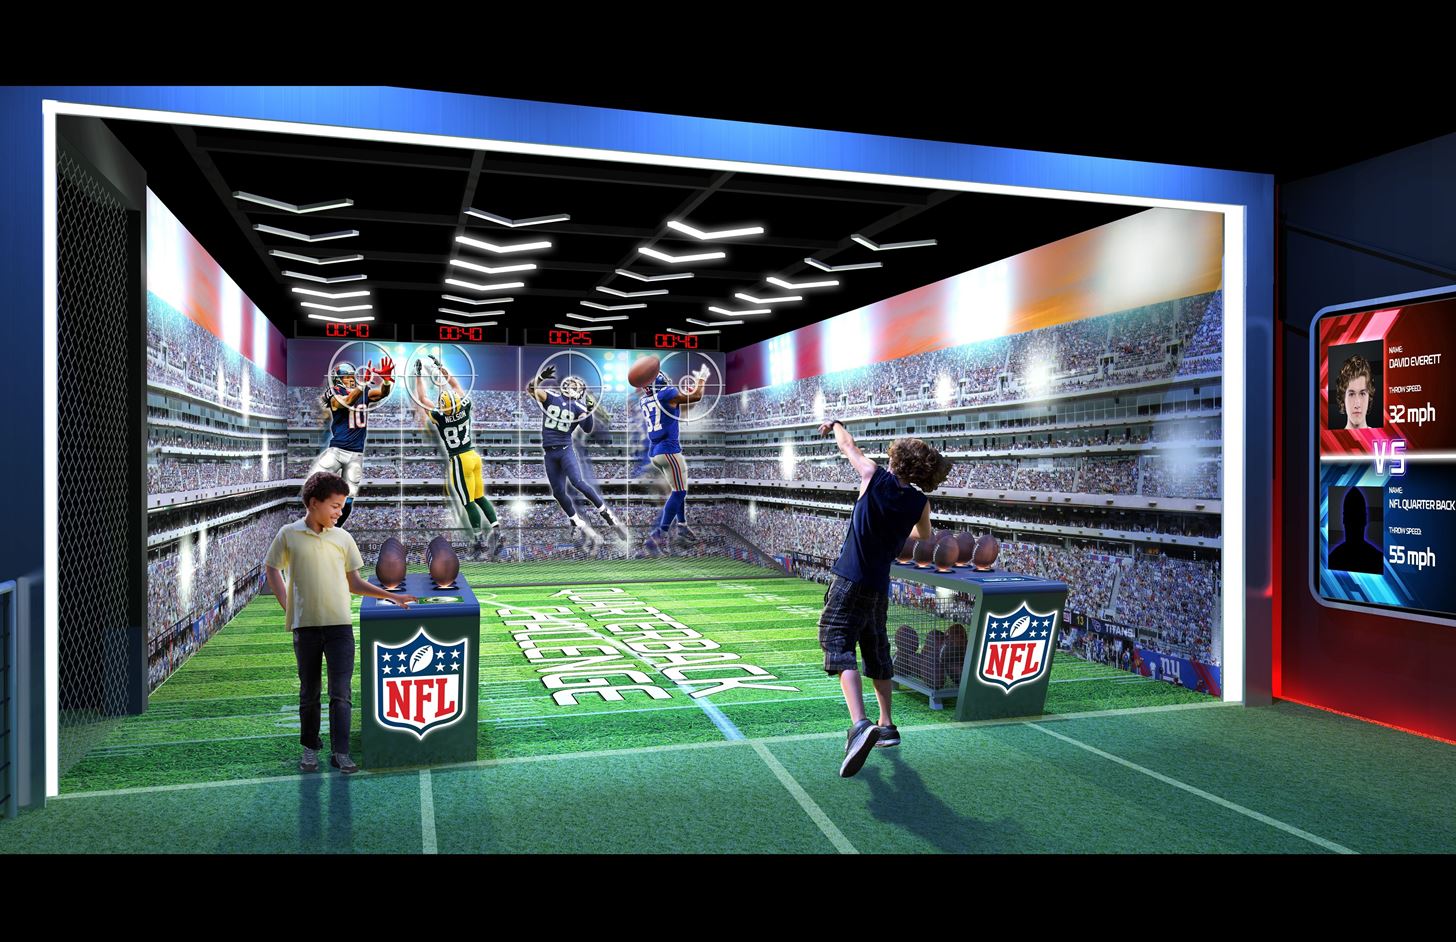 NFL Audibles to Augmented Reality for Fan Experience